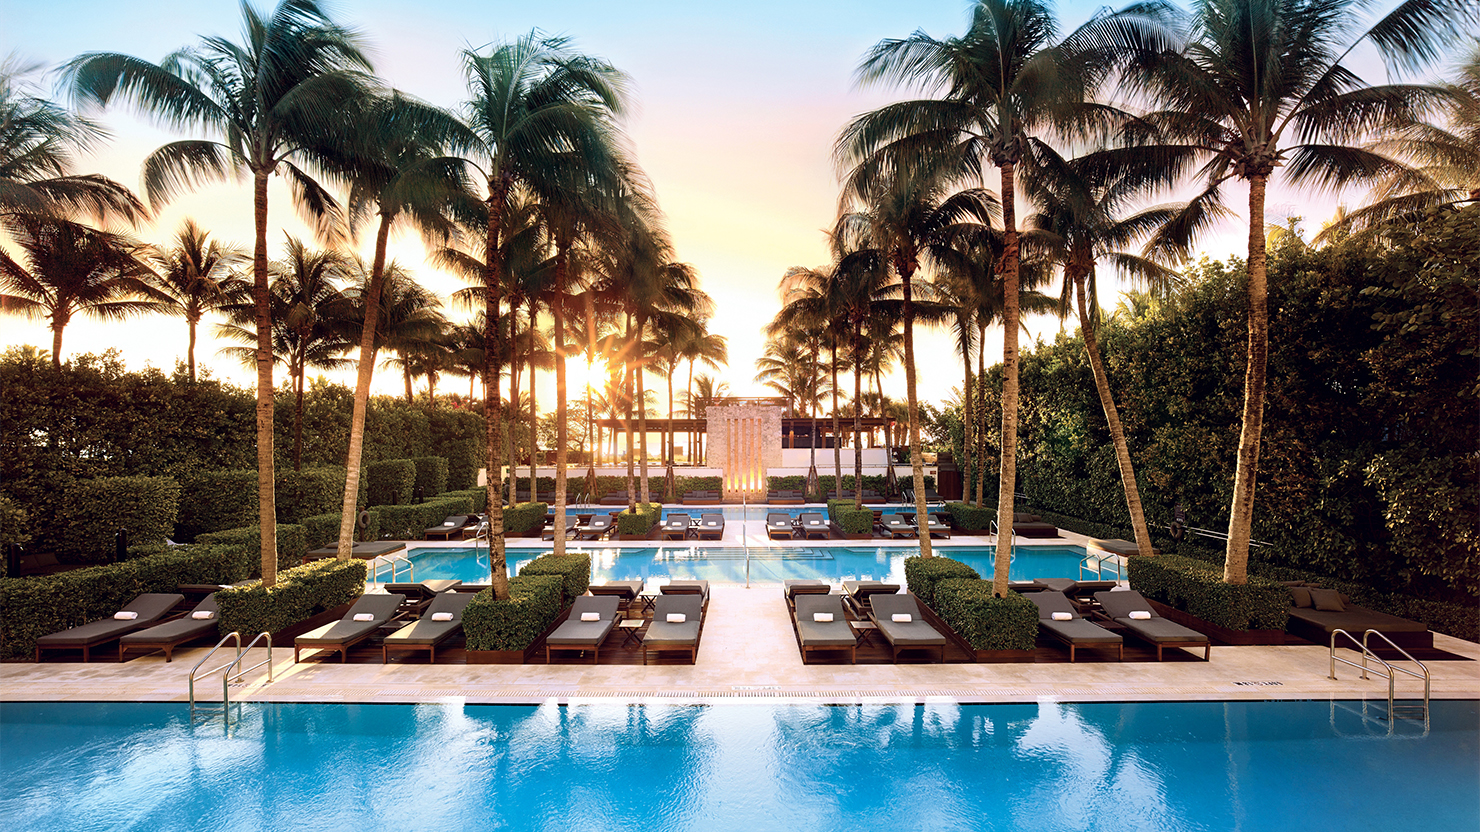 Top 10 best luxury hotels & resorts in Miami the Luxury Travel Expert